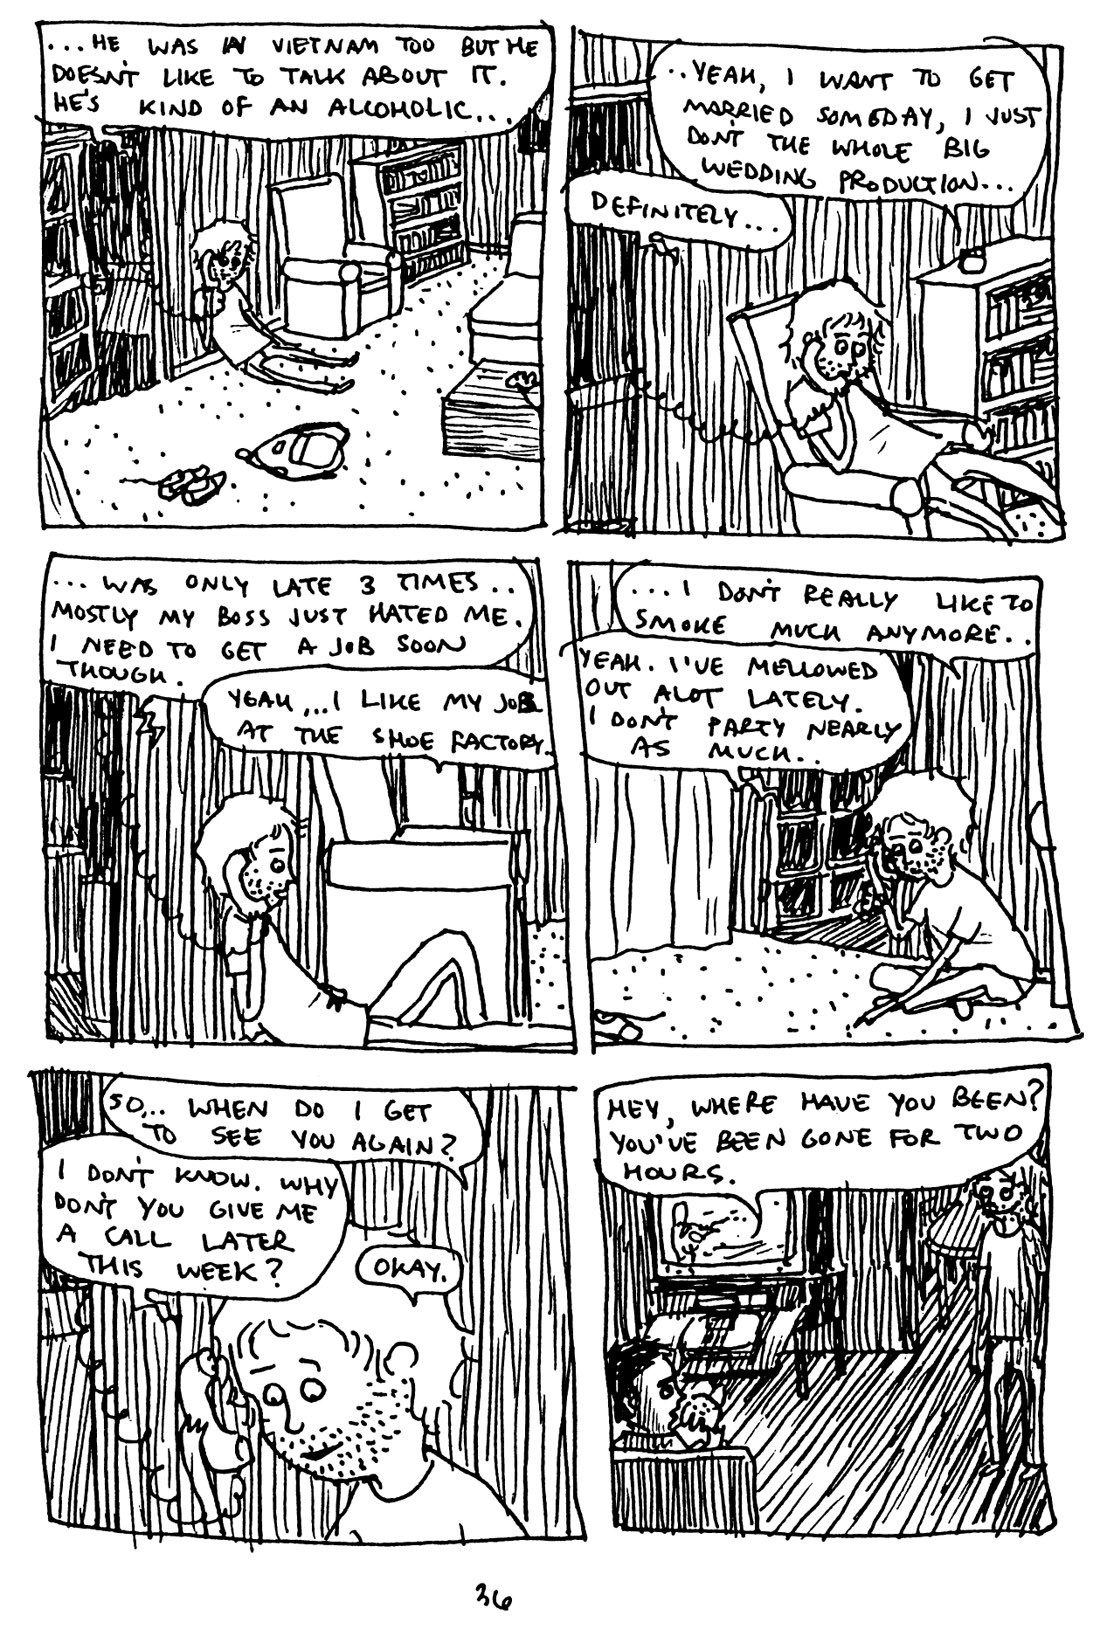 Read online Unlikely comic -  Issue # TPB (Part 1) - 46